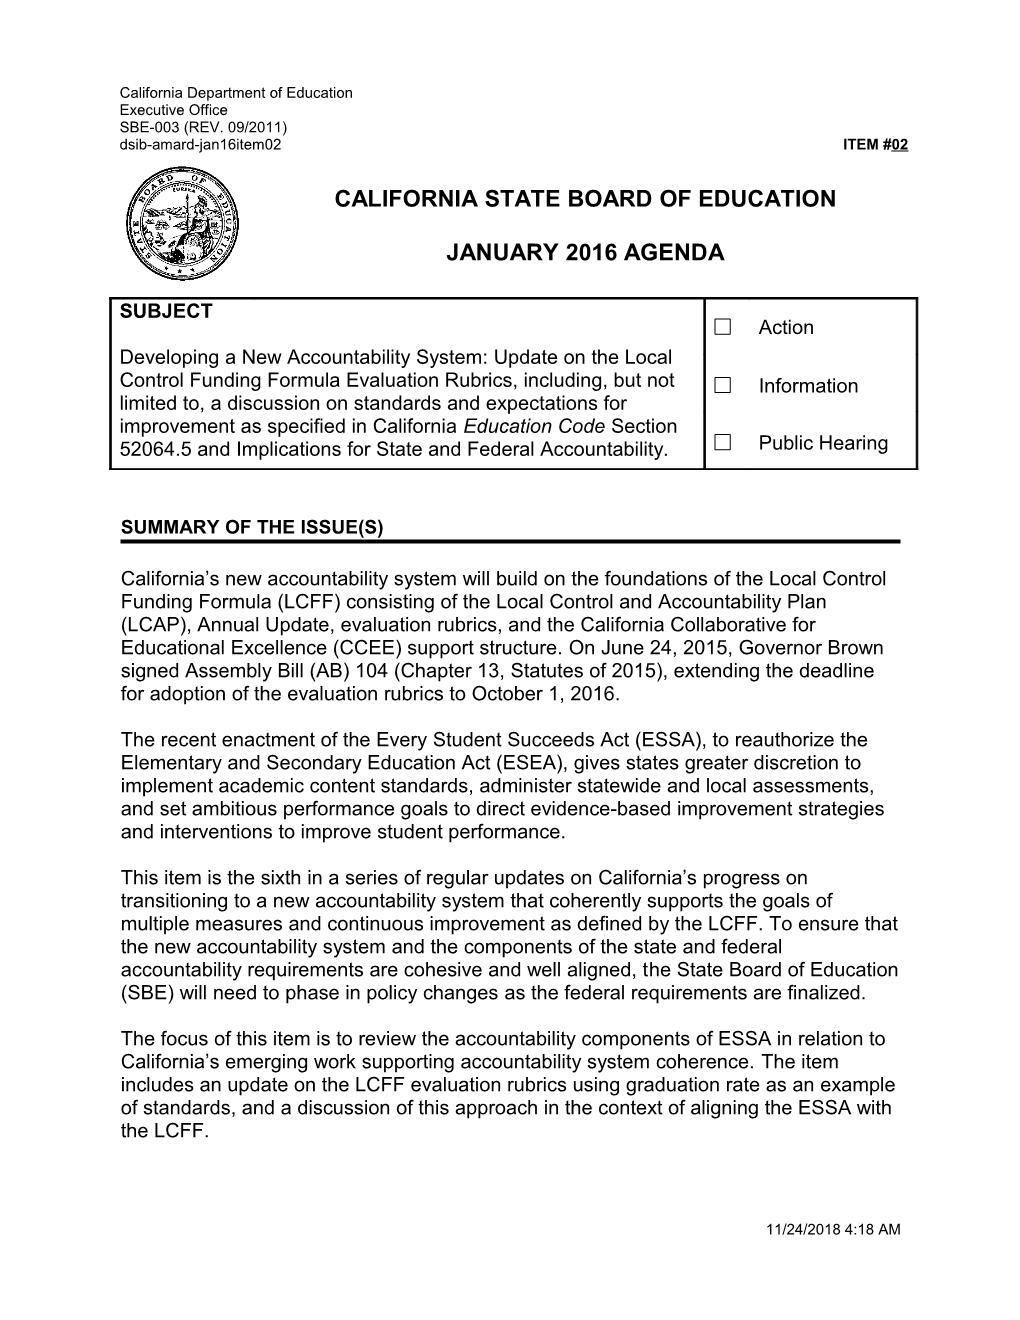 January 2016 Agenda Item 02 Updated - Meeting Agendas (CA State Board of Education)